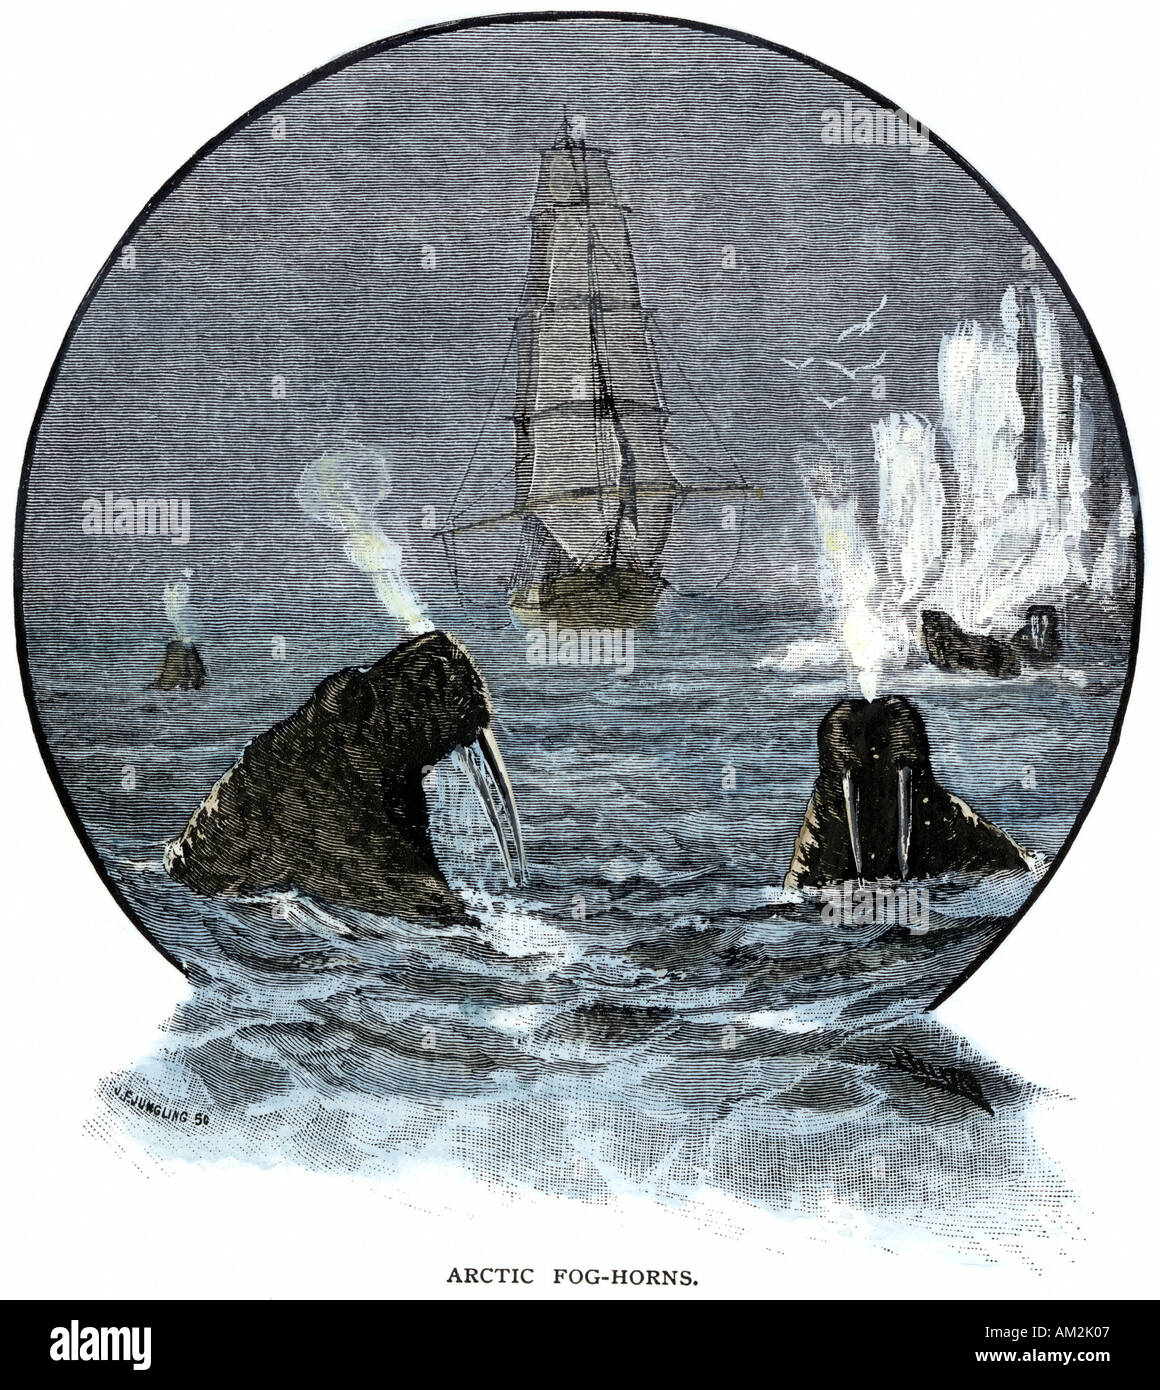 Walrus in Arctic waters near a tall sailing ship. Hand-colored woodcut Stock Photo